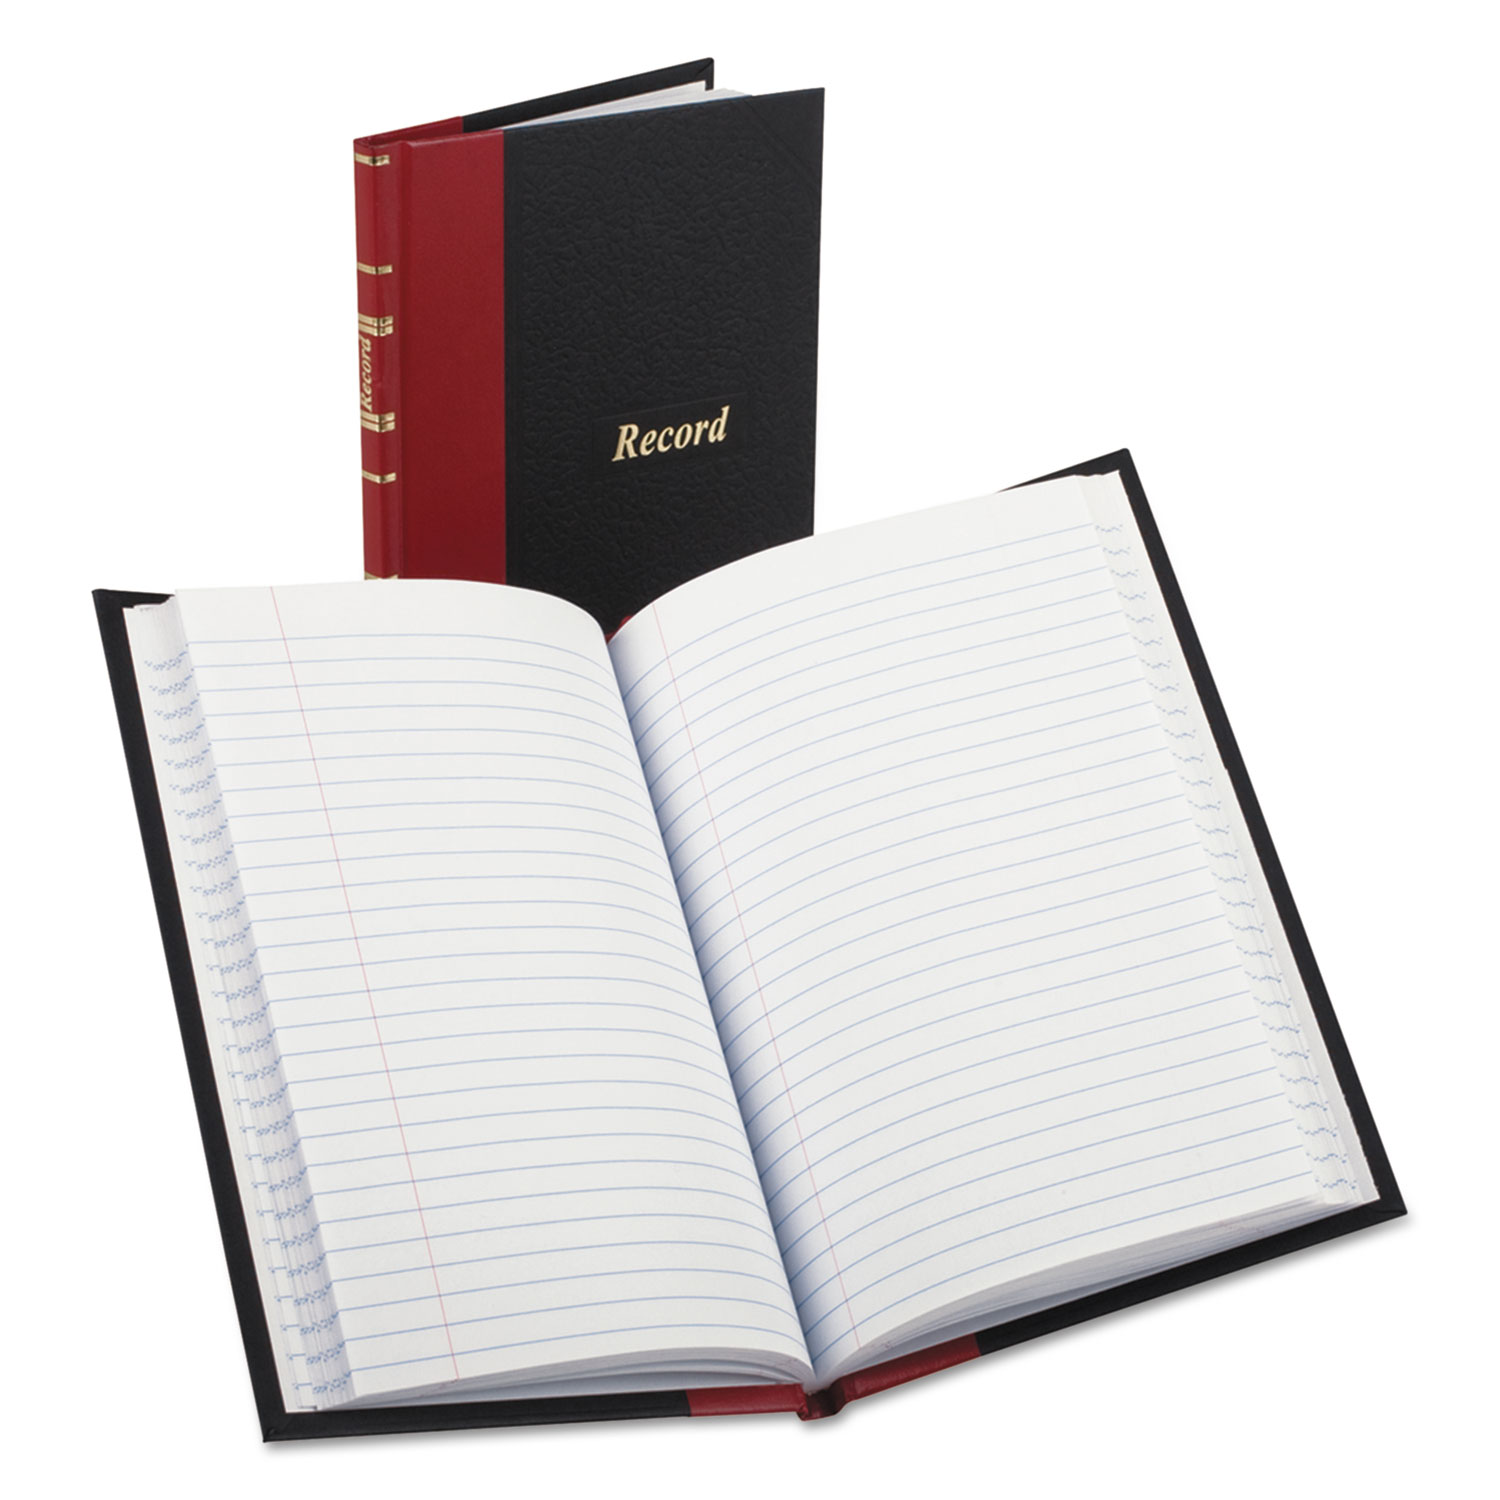  Boorum & Pease 96304EE Record/Account Book, Black/Red Cover, 144 Pages, 5 1/4 x 7 7/8 (BOR96304) 